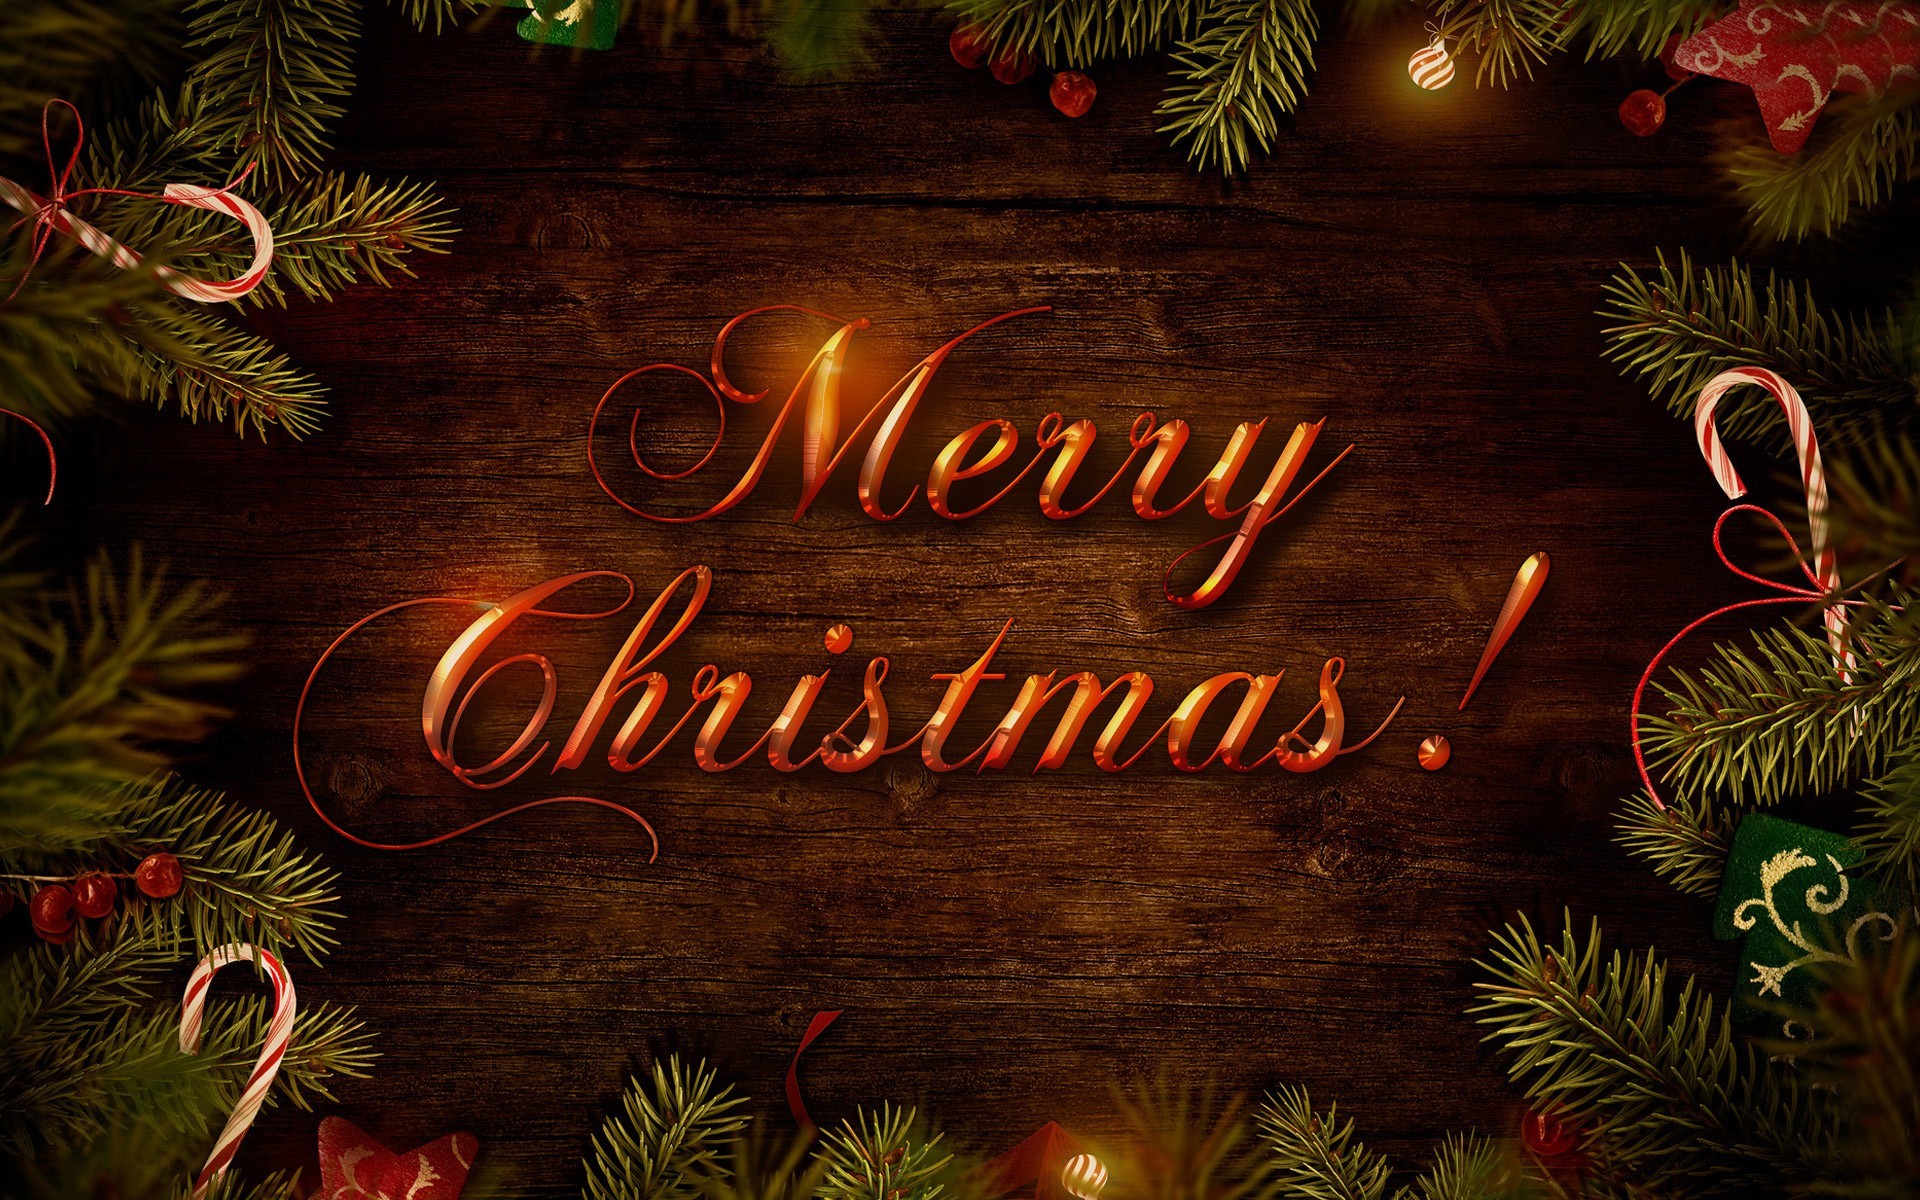 1920x1200 Merry Christmas Wallpapers hd 2015 free download